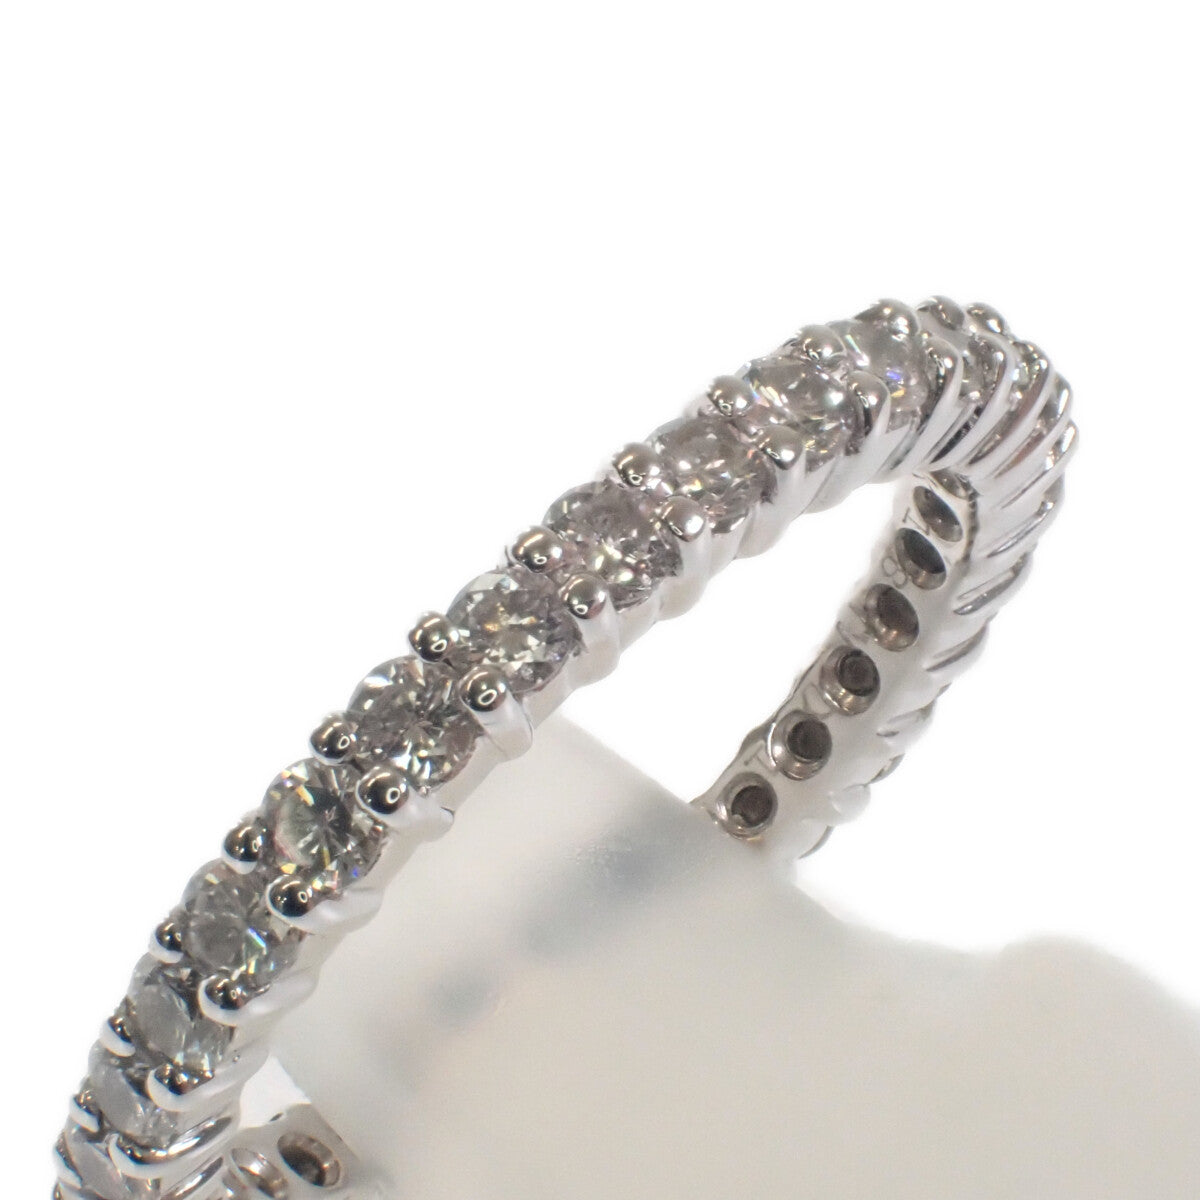 K18 White Gold Full Eternity Design Ring with 1.06ct Diamonds, Size 12 - Silver, for Women- Ideal for Special Occasions- (Pre-owned)